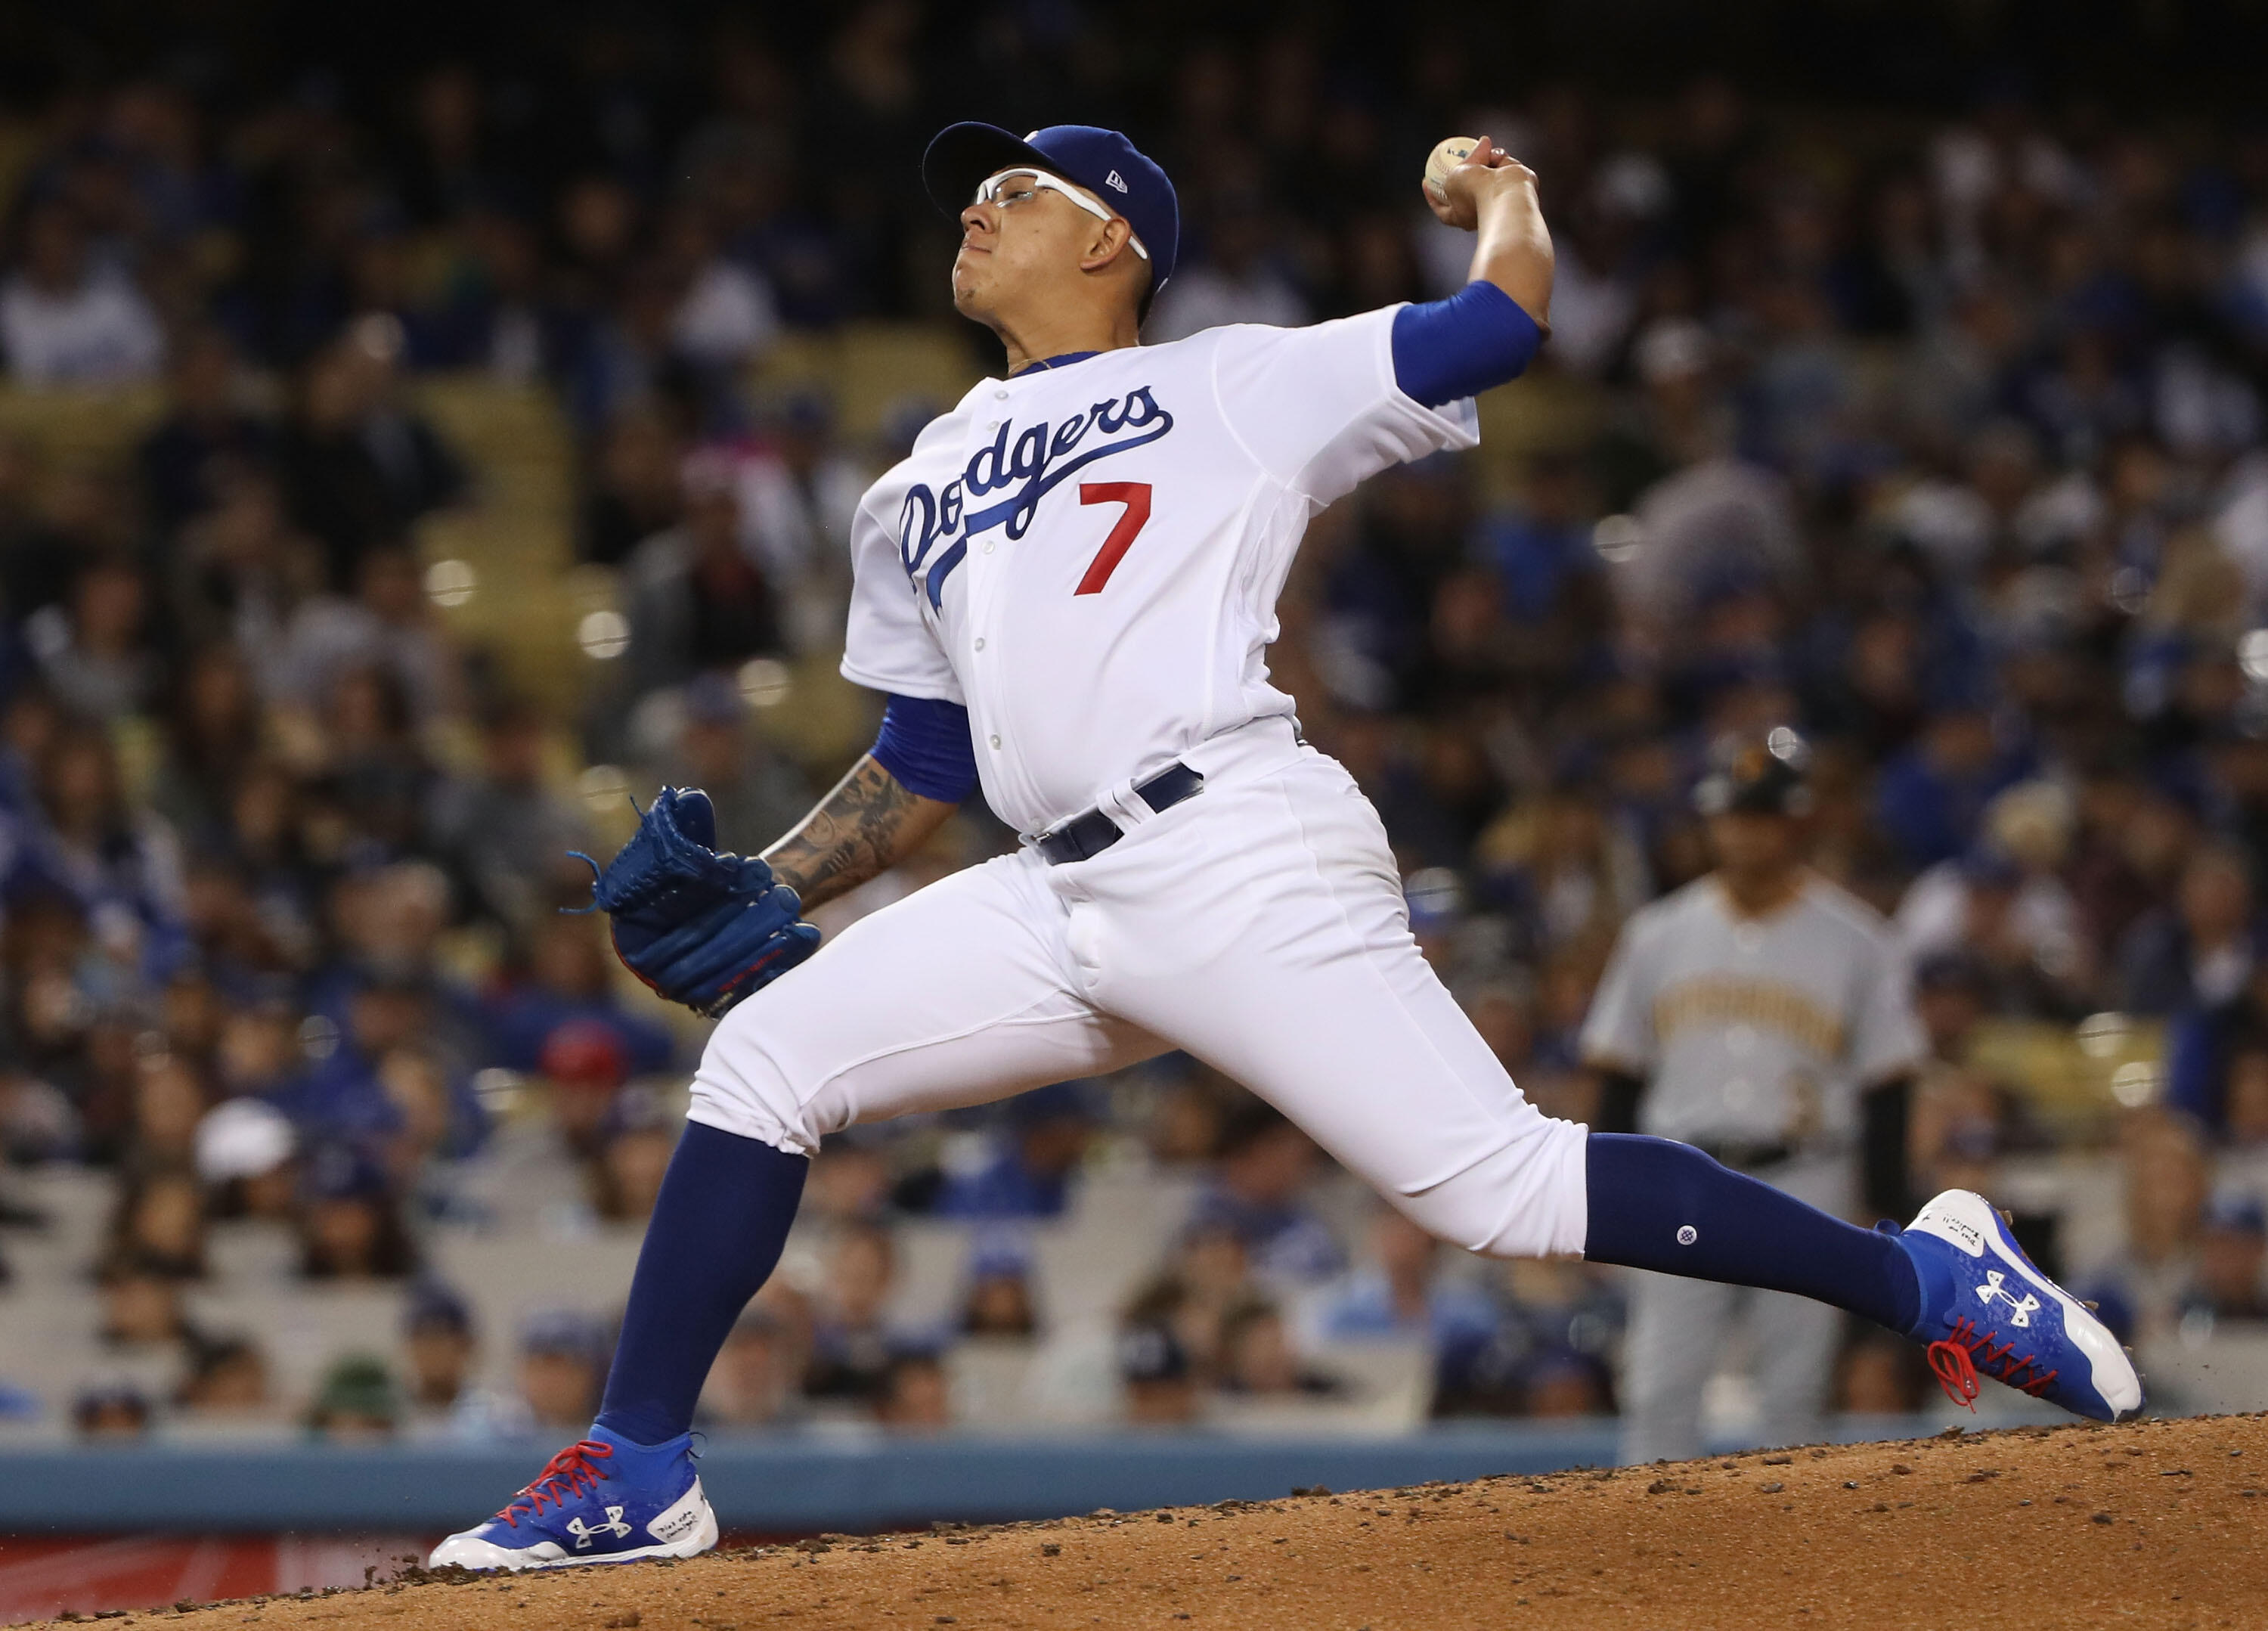 LOS ANGELES, CA - MAY 09: Pitcher Julio Urias #7 of the Los Angeles Dodgers pitches in the third inning during the MLB game against the Pittsburgh Pirates at Dodger Stadium on May 9, 2017 in Los Angeles, California.  (Photo by Victor Decolongon/Getty Imag